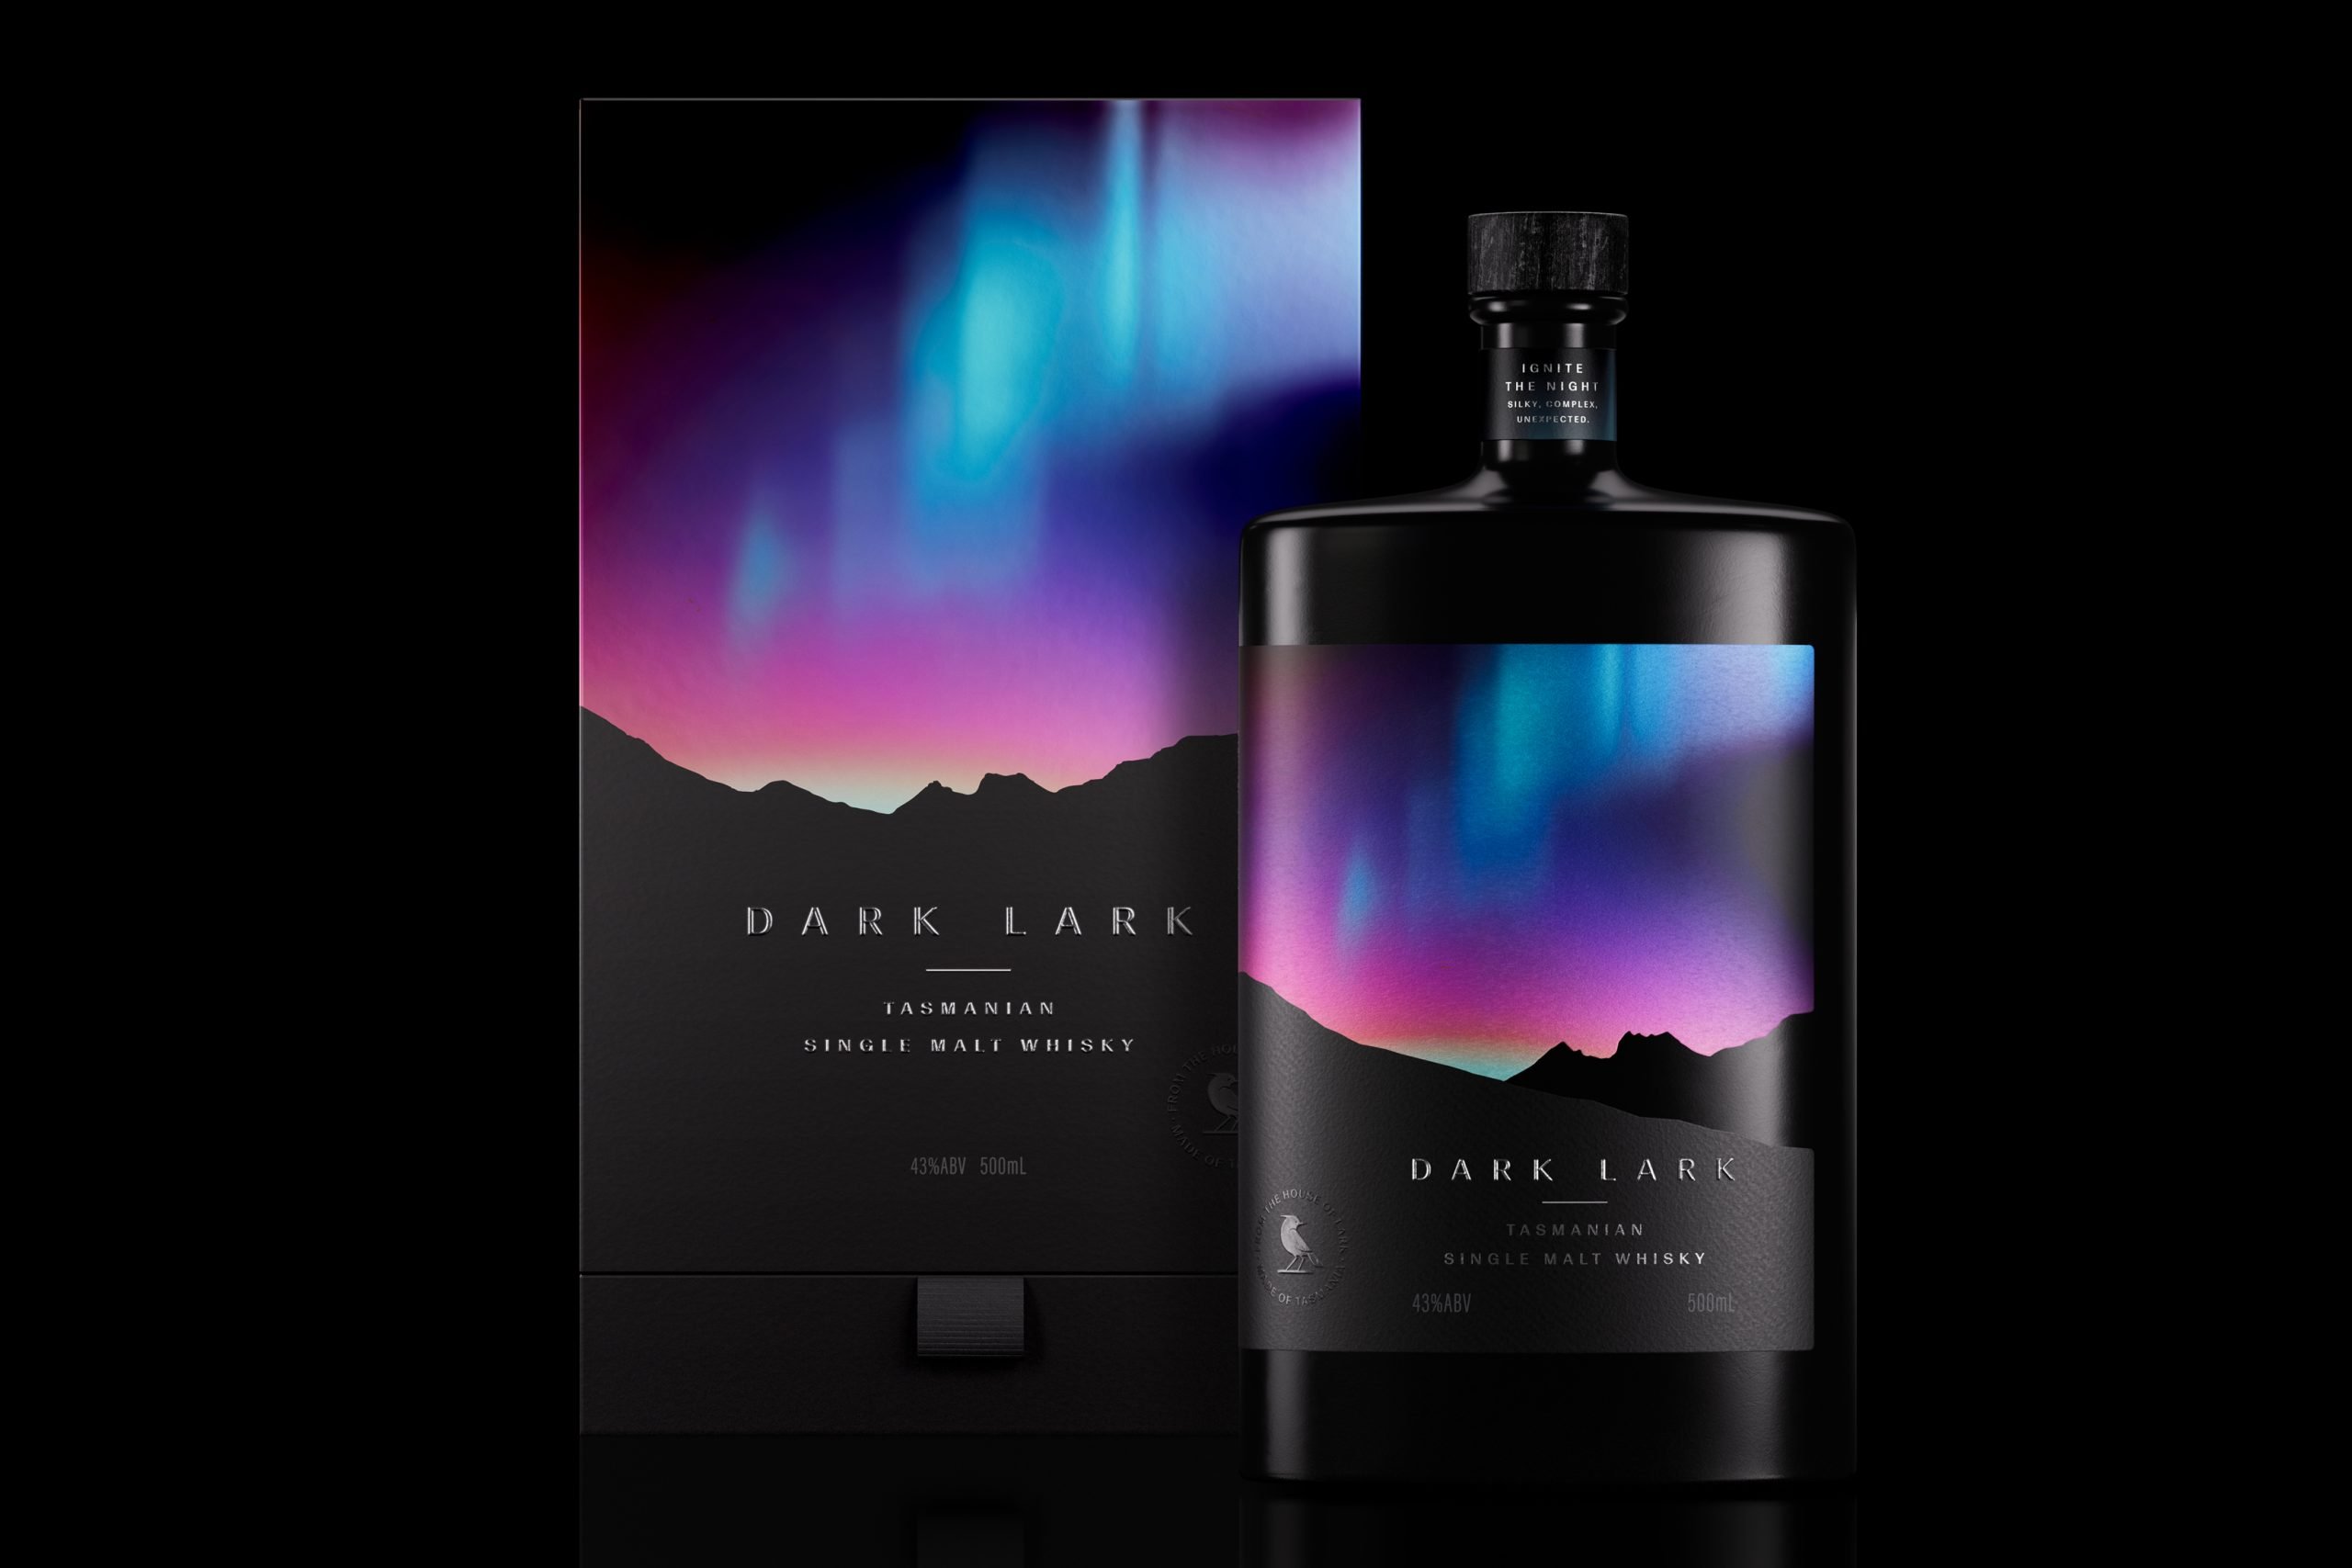 Dark Lark Honors This Weekend’s Surprise Auroras with a Gorgeous Southern Lights-Inspired Bottle